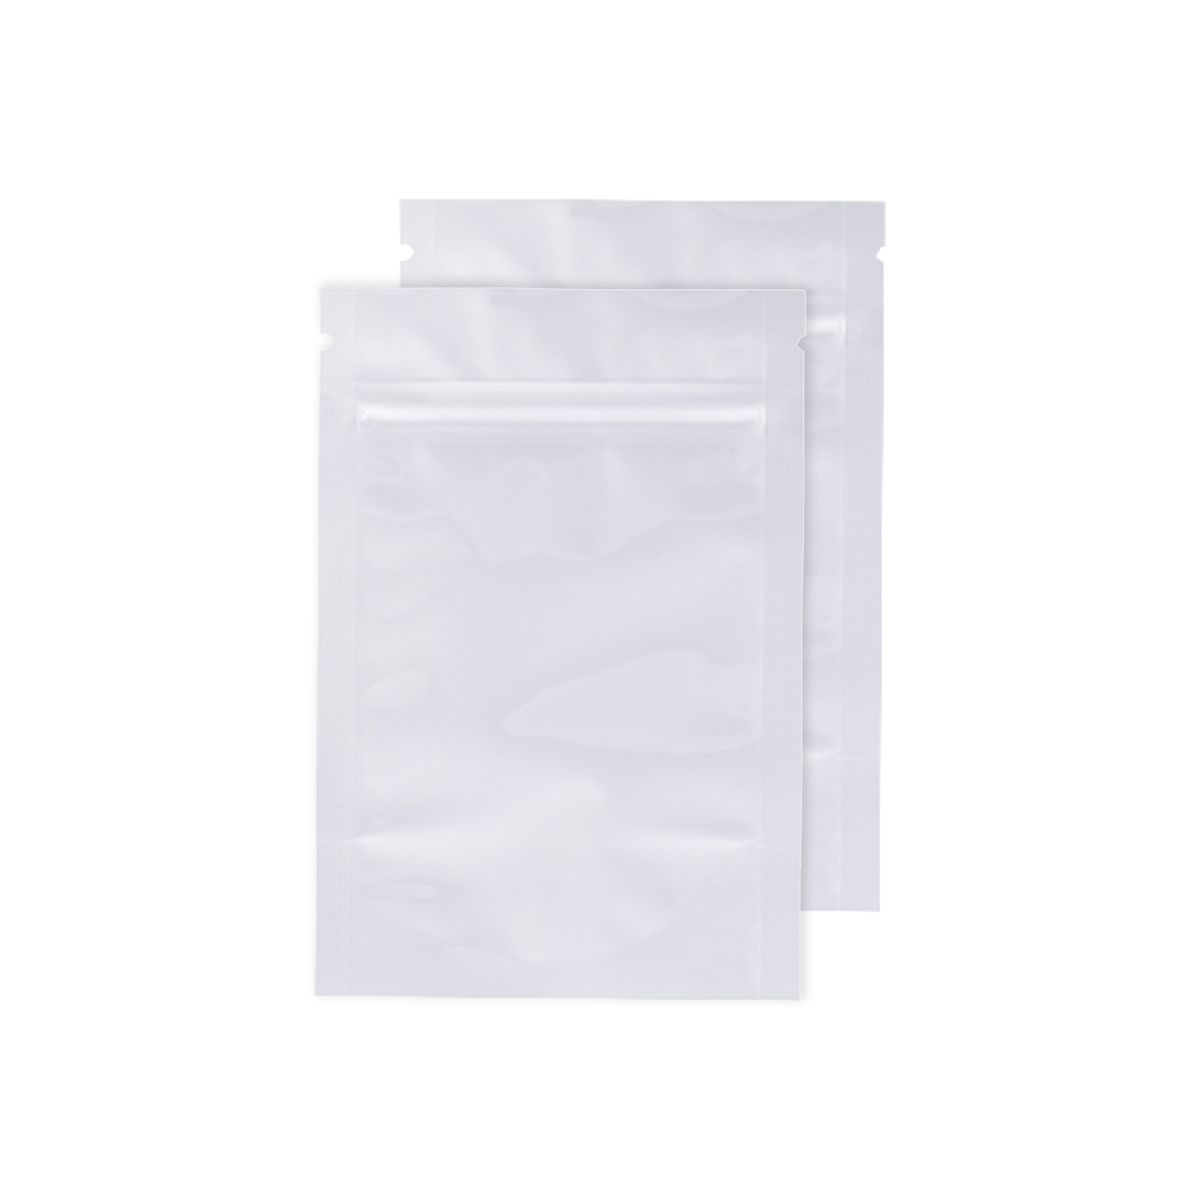 Photo of Eighth Ounce White/White Opaque Barrier Bags